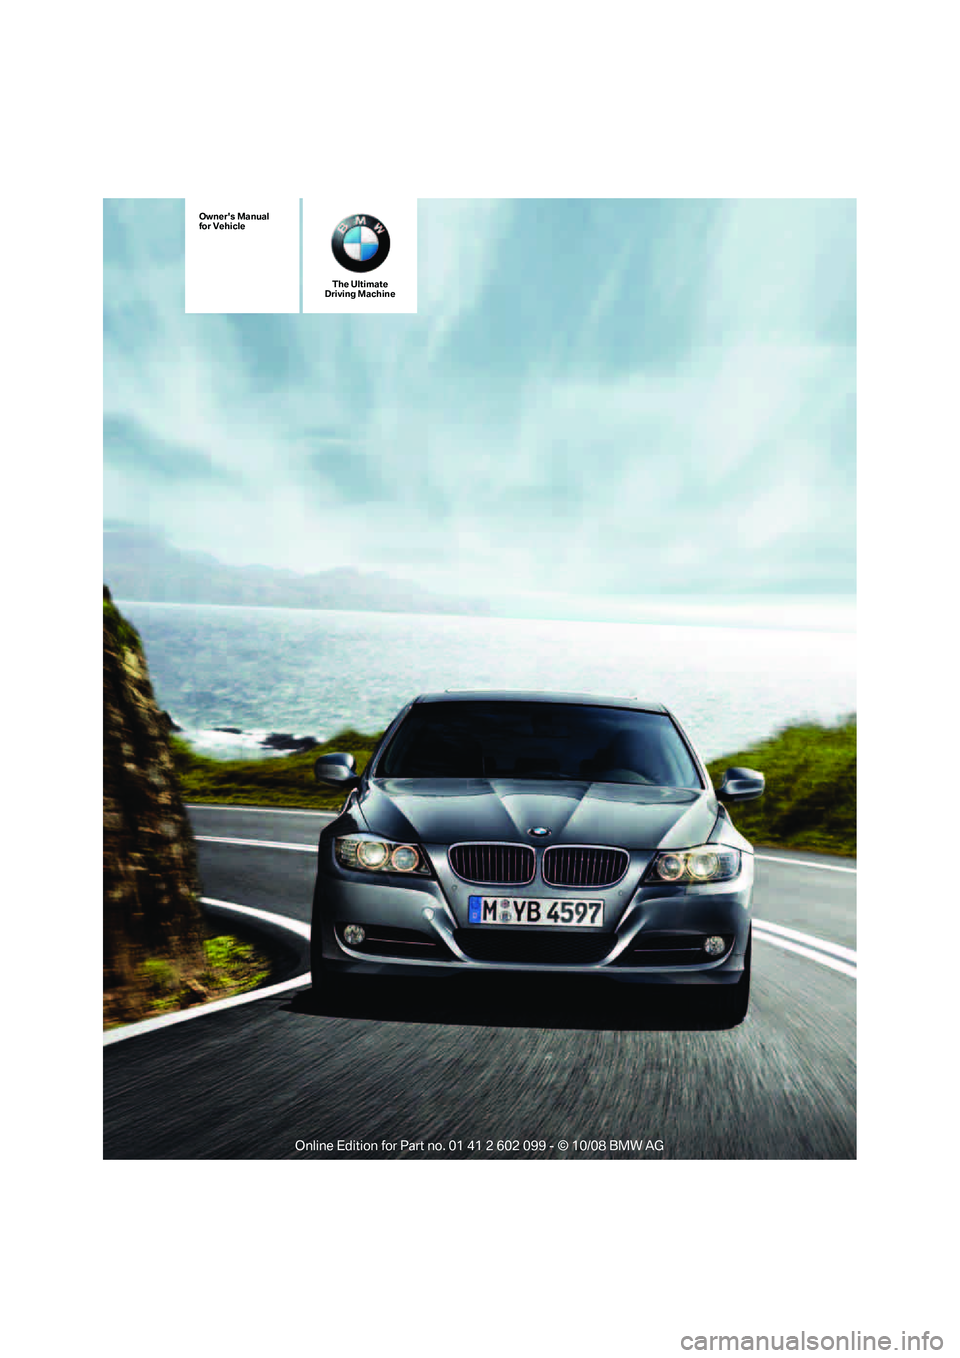 BMW 330D 2009  Owners Manual The Ultimate
Driving Machine
Owners Manual
for Vehicle
ba8_E9091_cic.book  Seite 1  Mittwoch, 29. Oktober 2008  2:59 14 